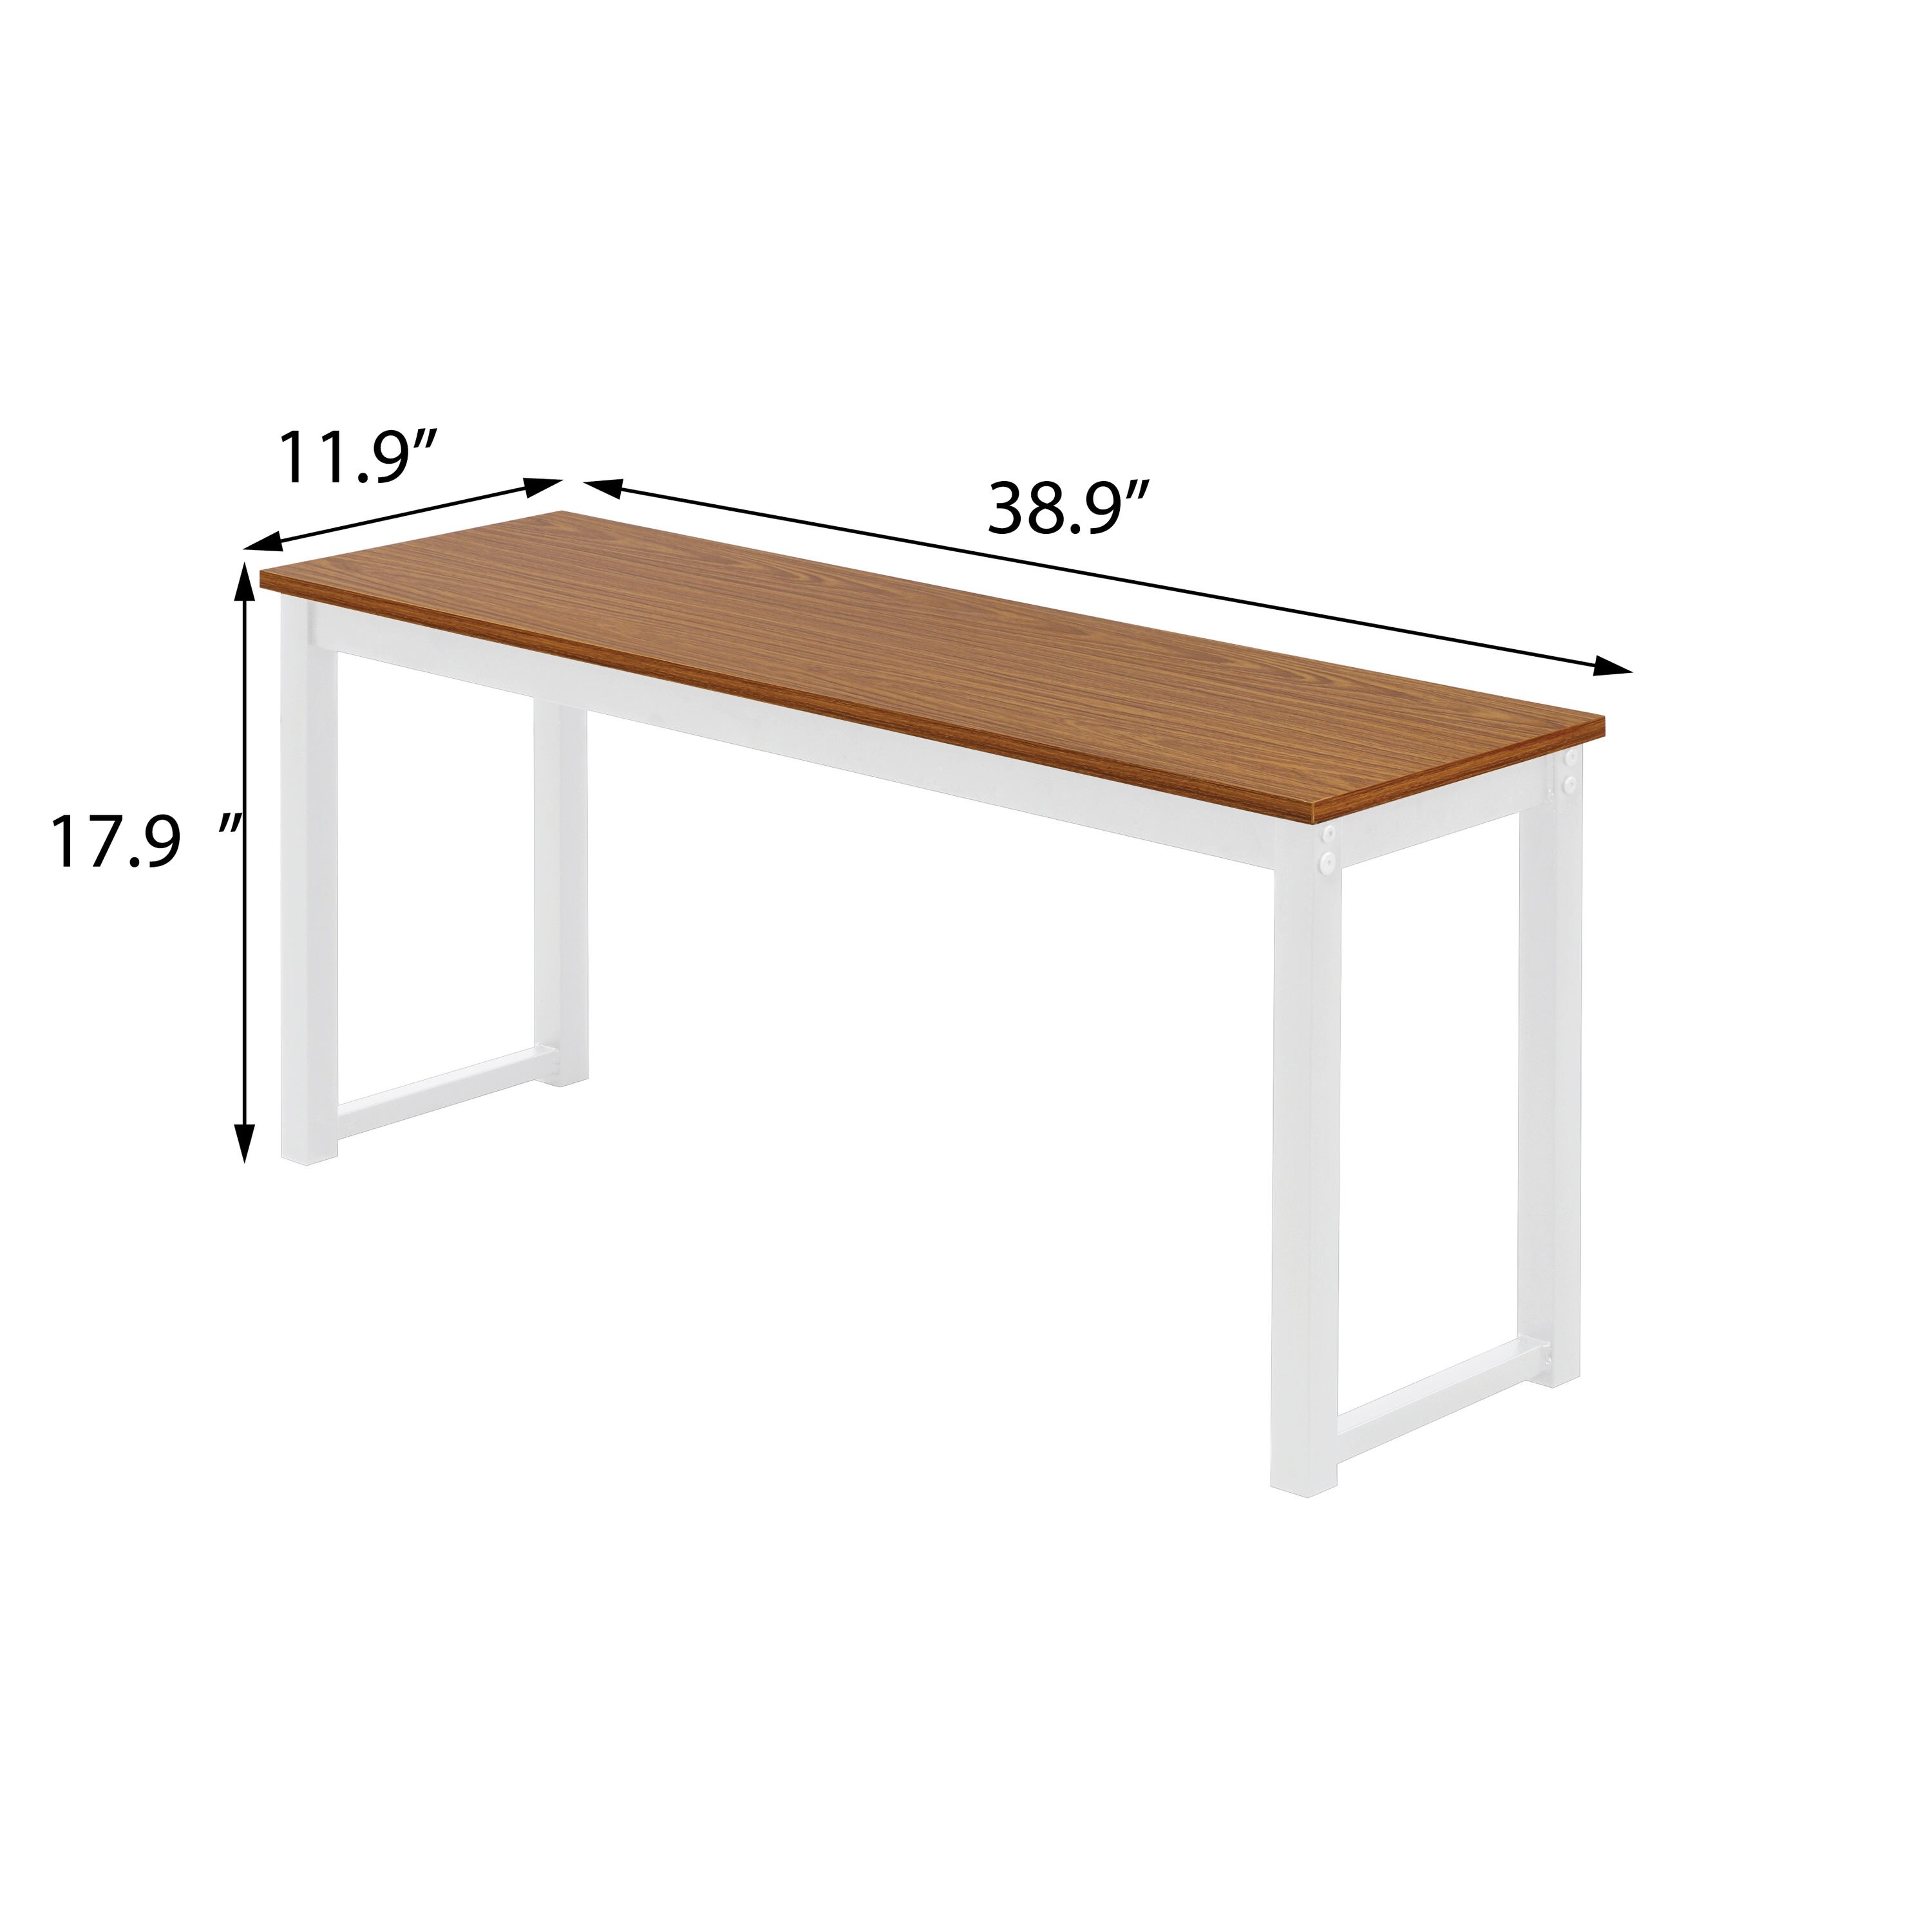 CASAINC White Contemporary/Modern Dining Table, Mdf with Metal Base in ...